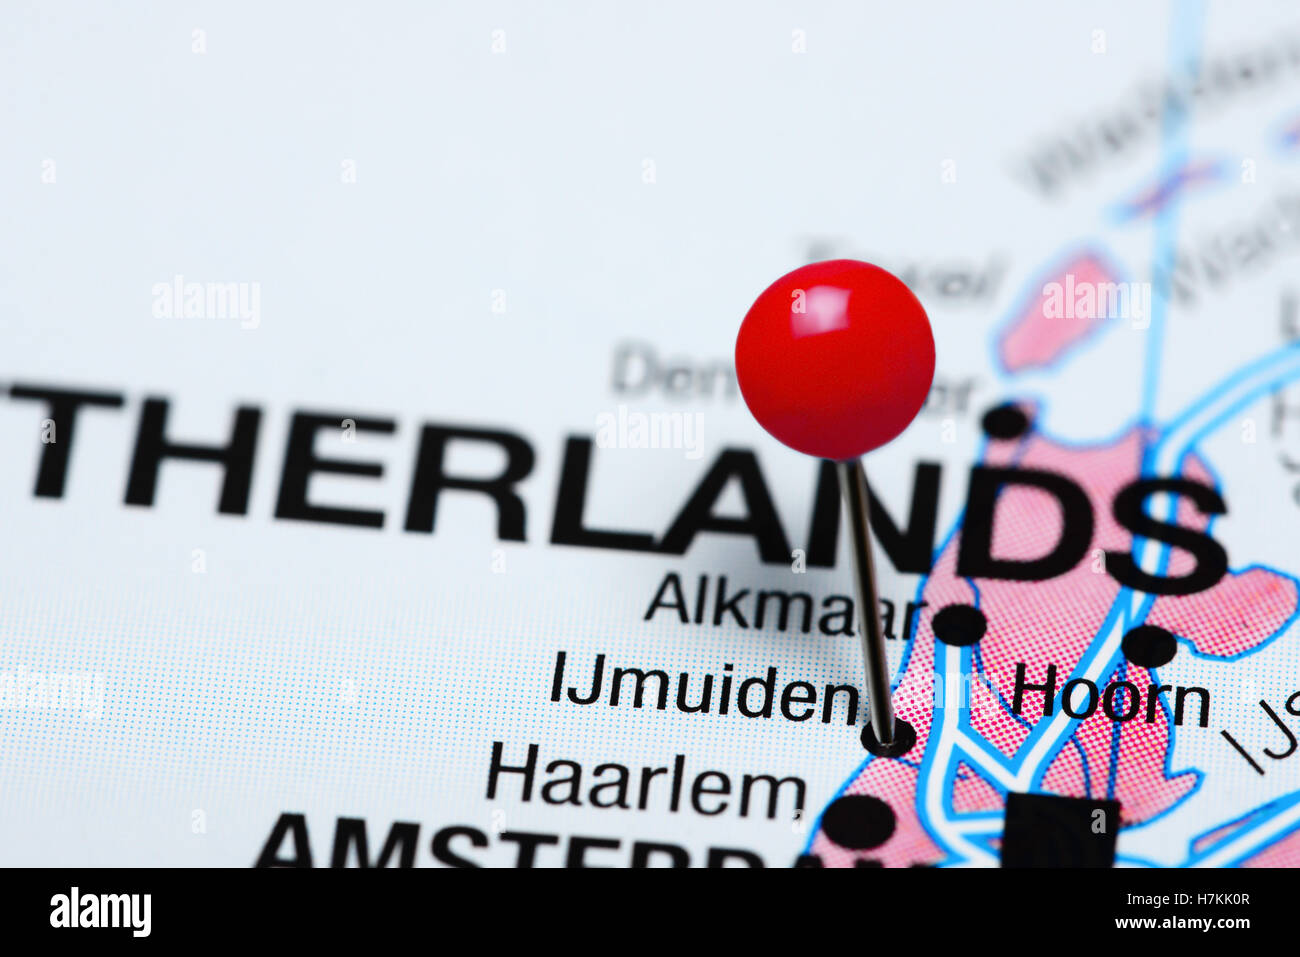 Ijmuiden pinned on a map of Netherlands Stock Photo